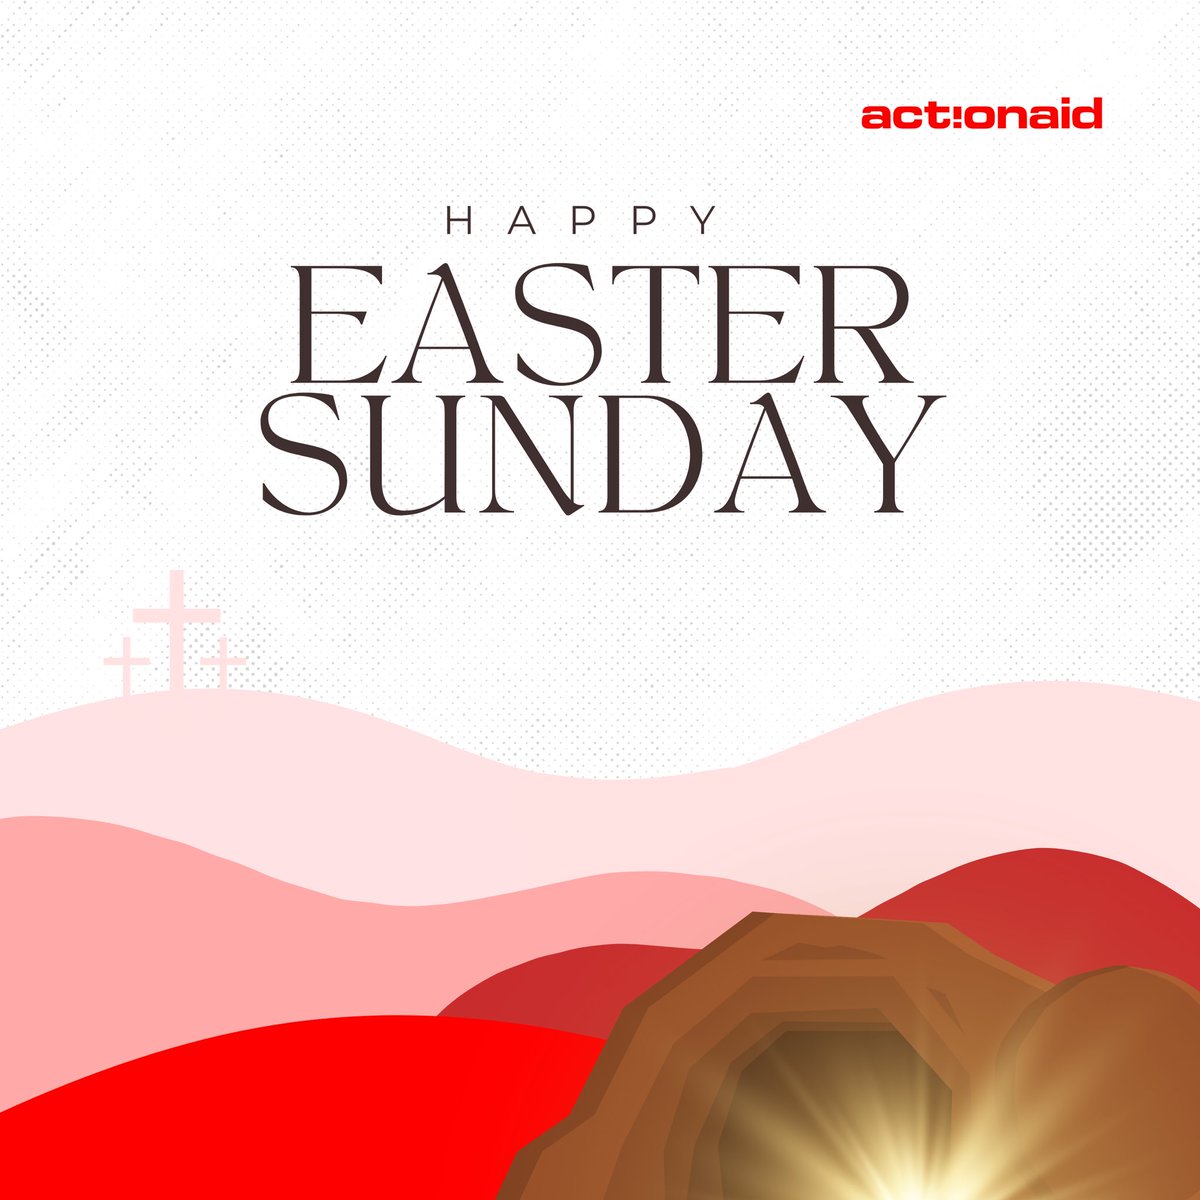 Sending Easter blessings your way, filled with love, peace, and the promise of new beginnings. Happy Easter from all of us @ActionAid Nigeria #Easter #EasterJoy